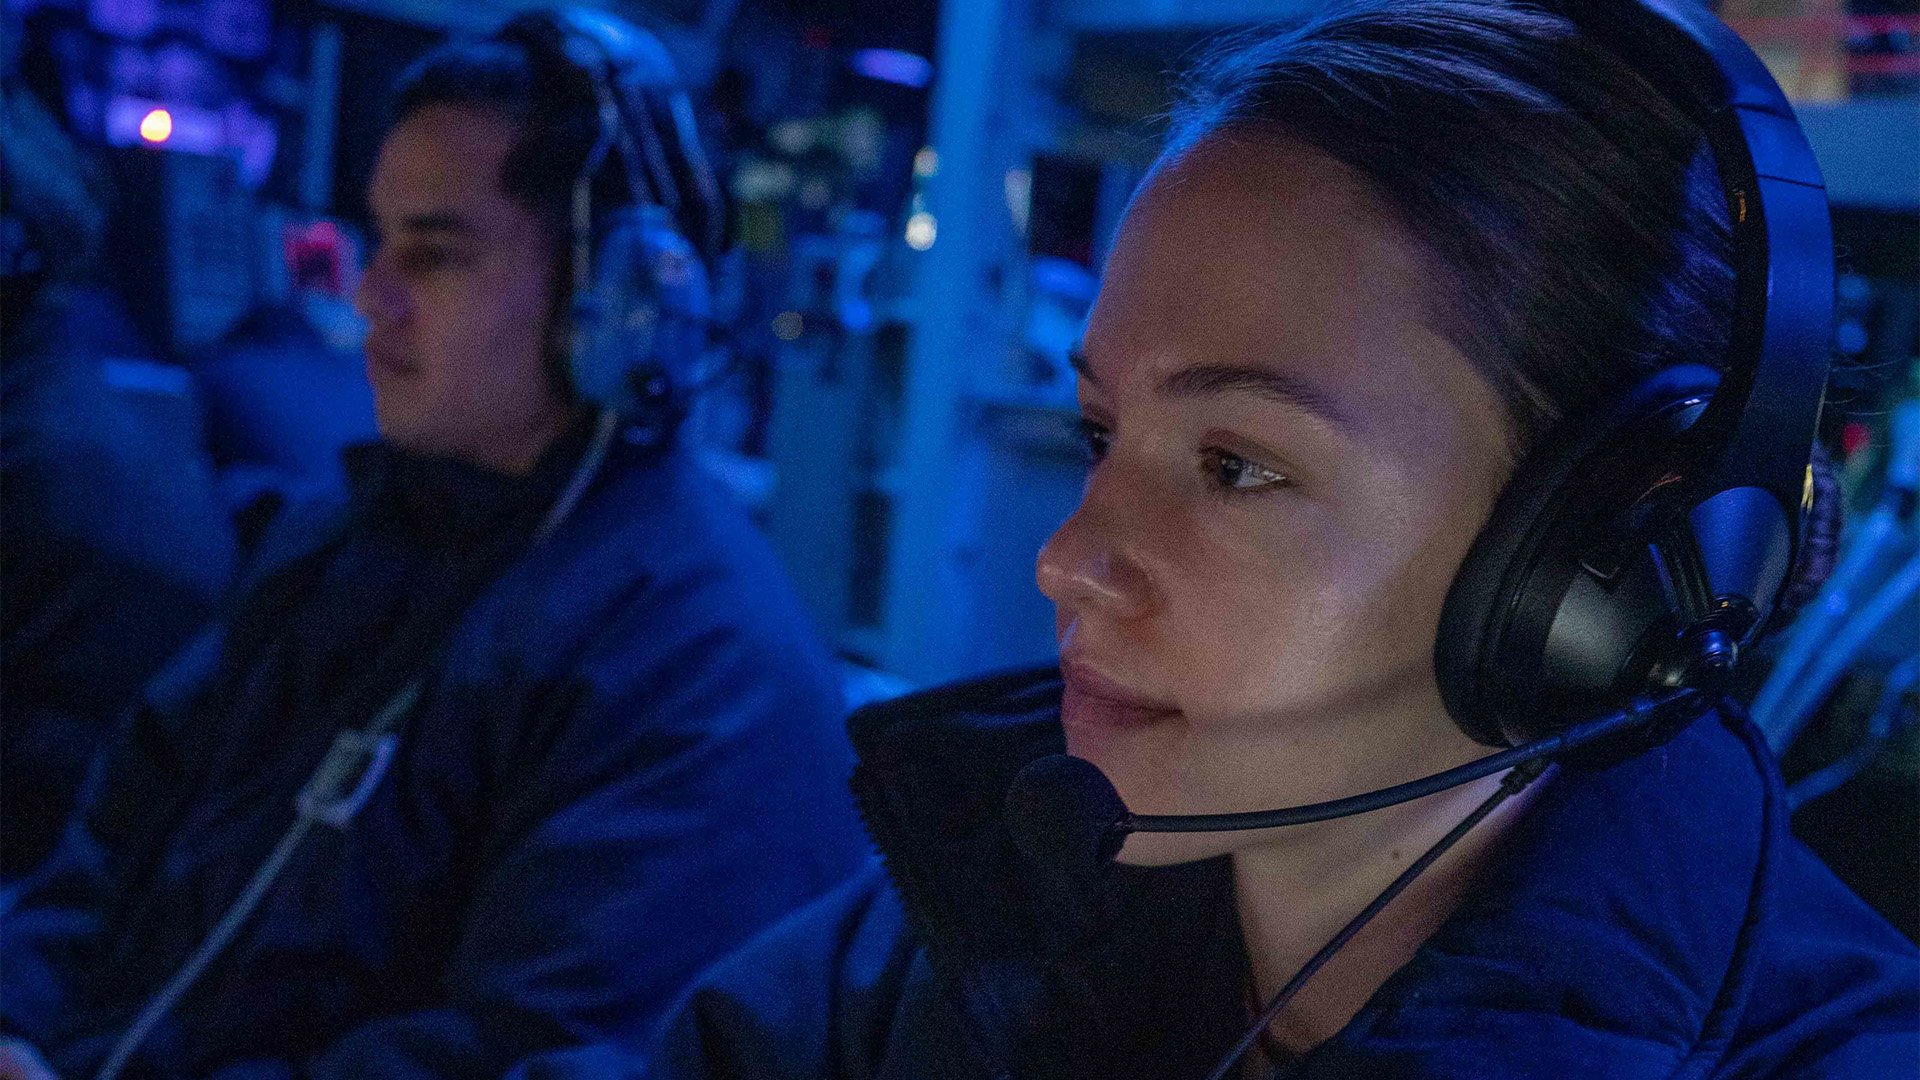 US Navy Lt. Hillary Lutkus tracks air contacts on board the Arleigh Burke-class guided-missile destroyer Chung-Hoon (DDG 93) while it transits the Taiwan Strait on Jan. 5, 2023. US Navy photo by Mass Communication Specialist 1st Class Andre T. Richard.